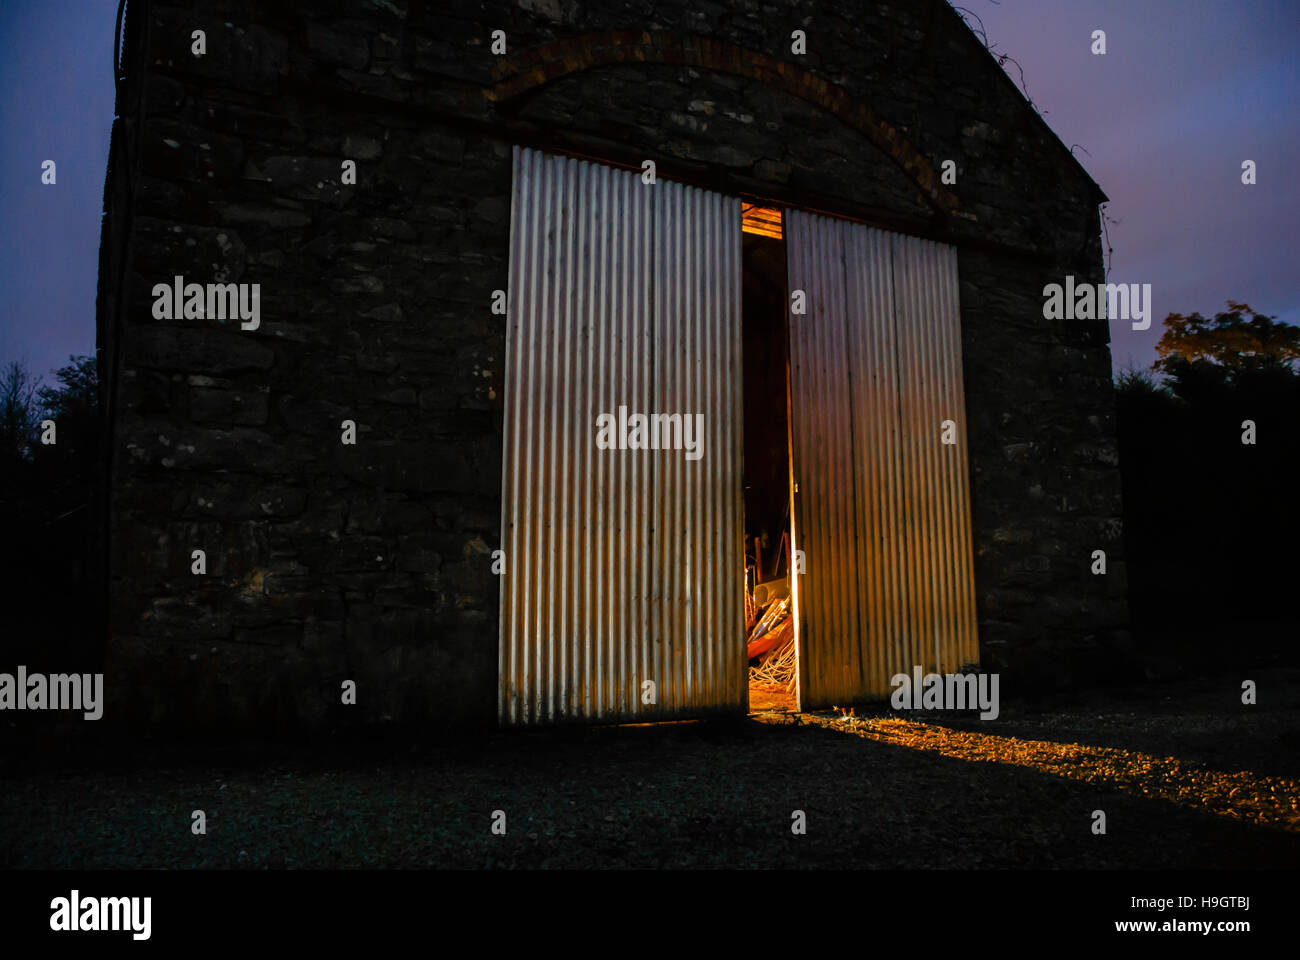 Light shines out from half open doors of an old Irish stone barn at night Stock Photo